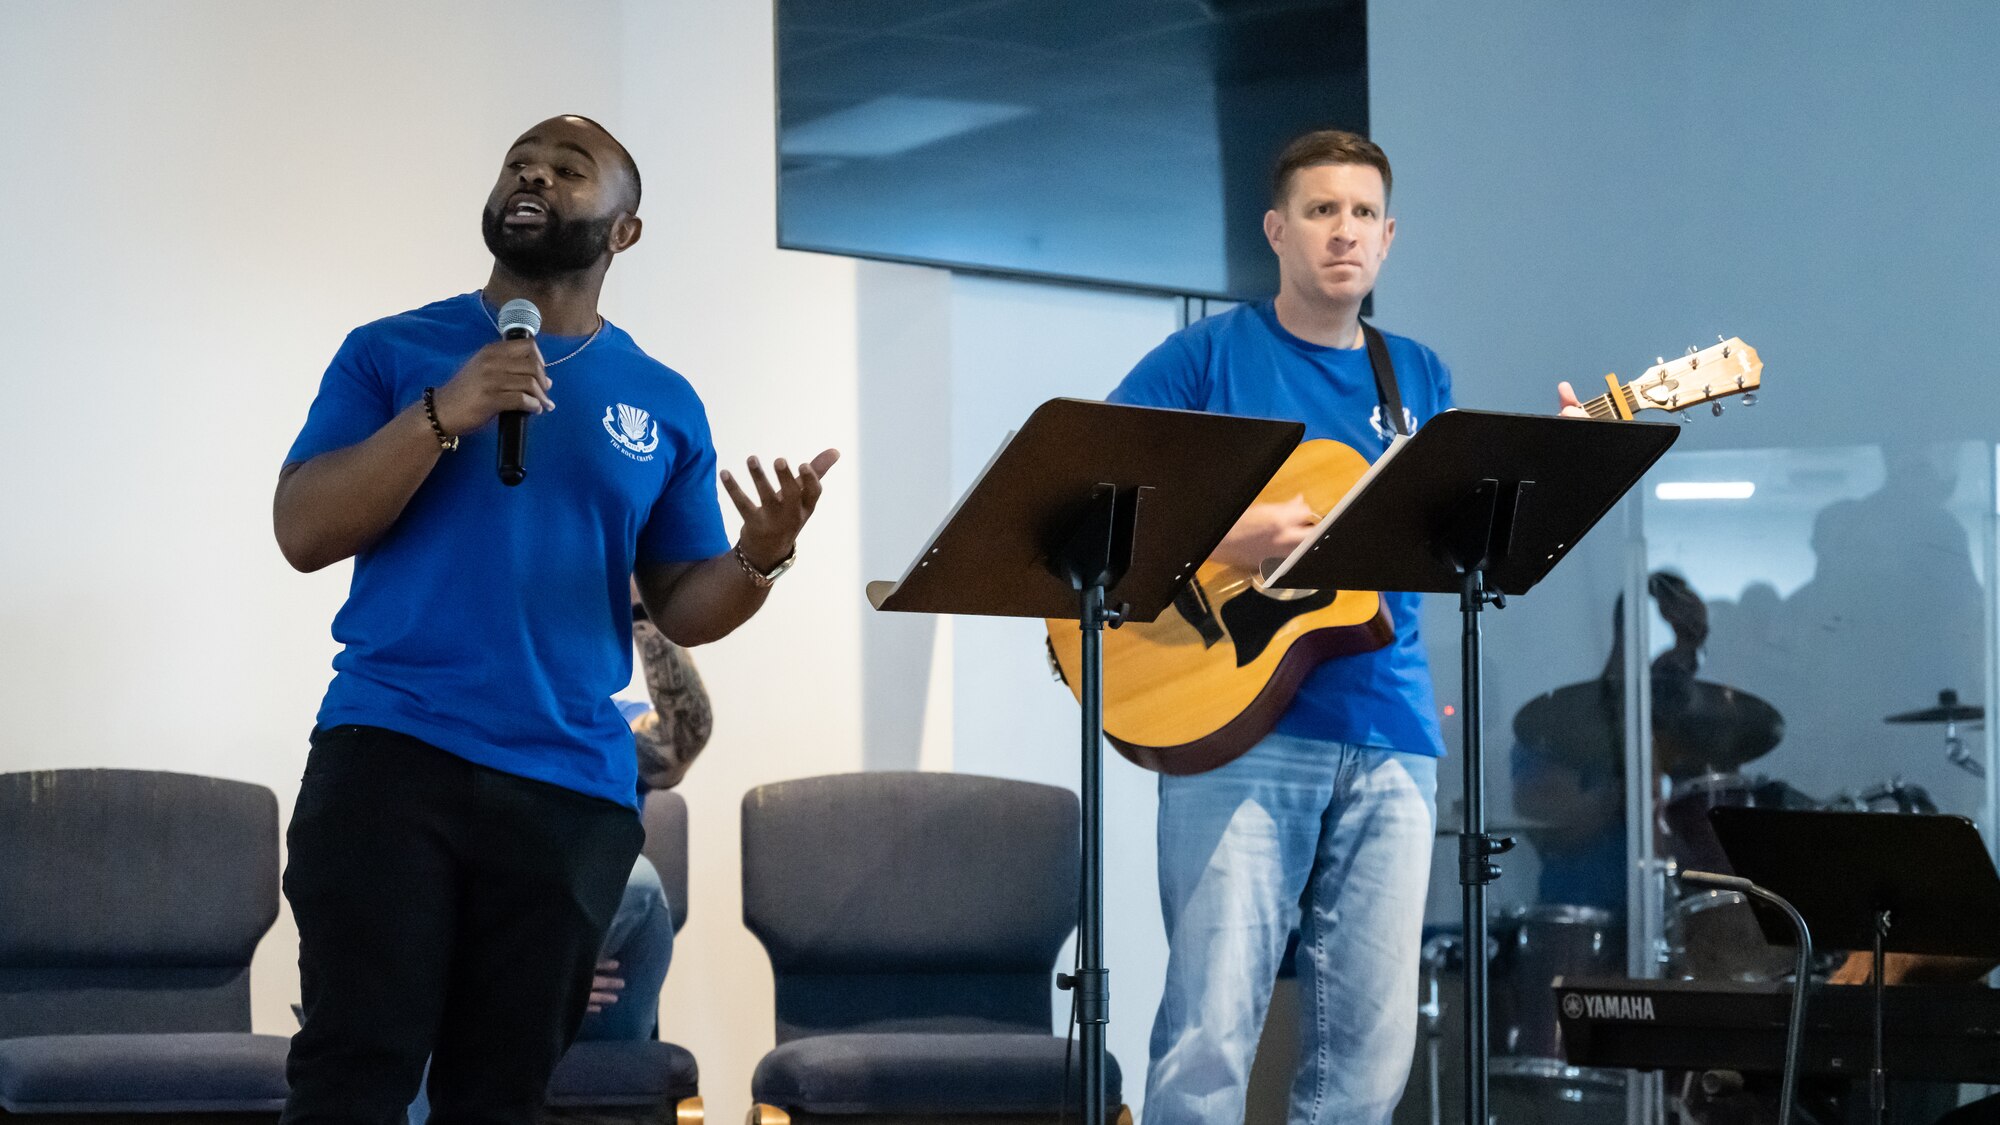 U.S. Air Force Tech Sgt. Rodrick Chandler, 386th Air Expeditionary Wing Equal Opportunity regional director (left) and Master Sgt. Robert Smith, 386th Expeditionary Communications Squadron first sergeant, perform a song together during a coalition worship event at the chapel at Ali Al Salem Air Base, Kuwait, Sept. 13, 2023. U.S. and partner nation forces from across the base came together for a night of song and prayer to bolster their spiritual fitness and cultivate the inclusiveness that power our enduring partnerships. (U.S. Air Force photo by Staff Sgt. Kevin Long)